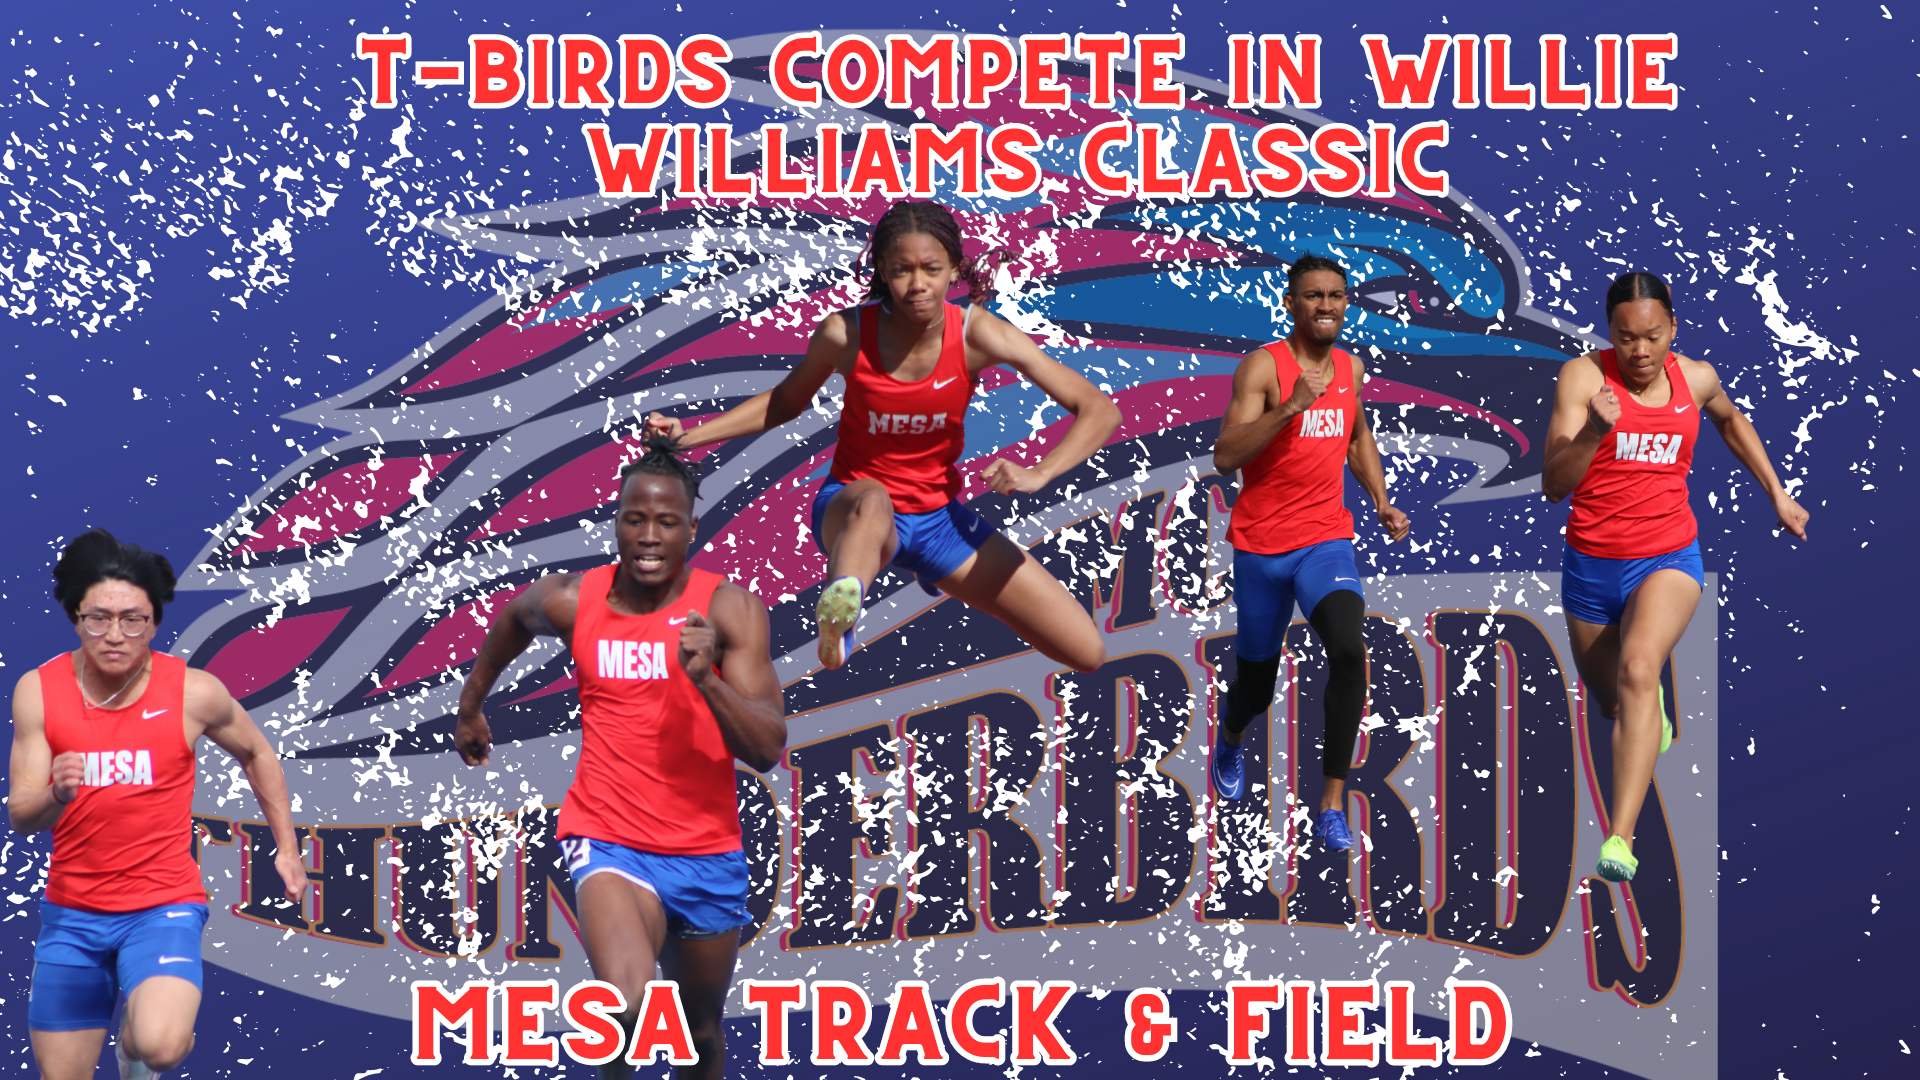 Mesa Track & Field battled in the Willie Williams Classic over the weekend